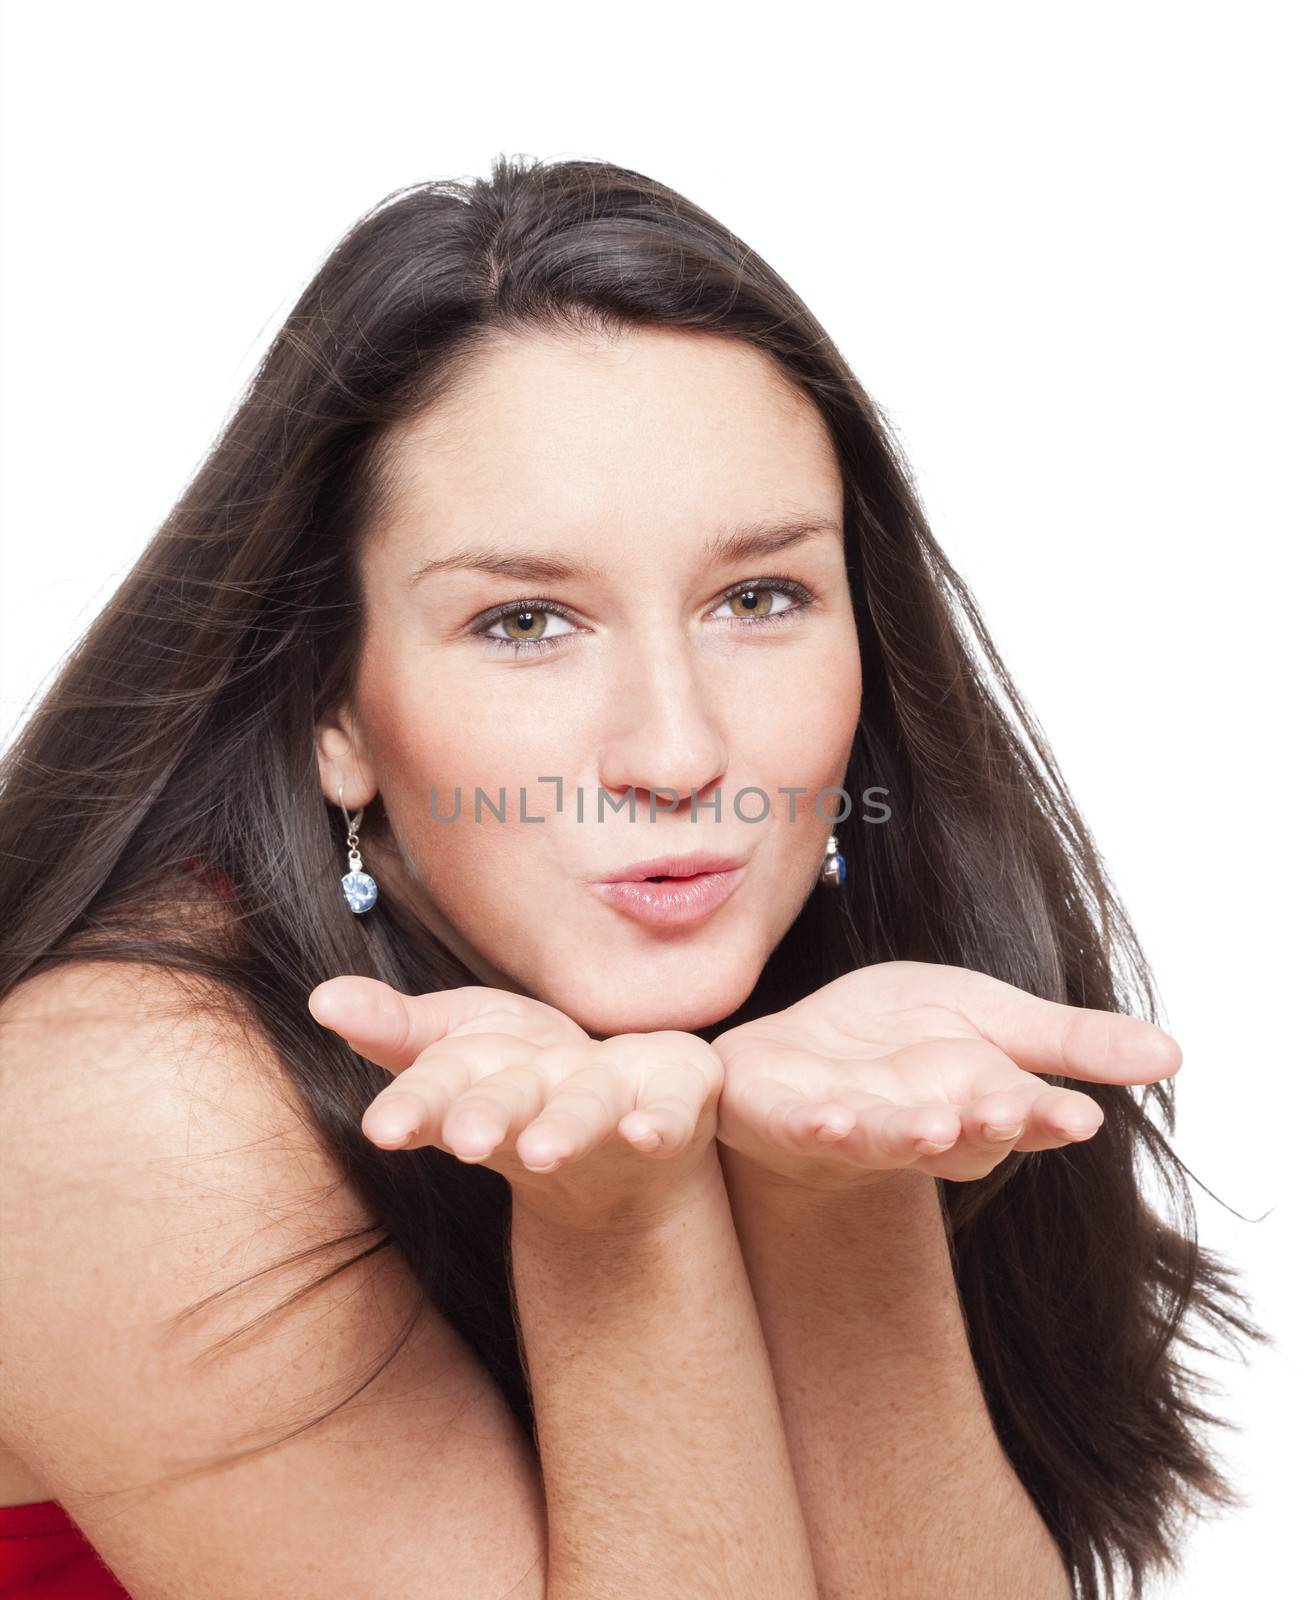 young girl sending away a kiss by blowing into her hands - isolated on white